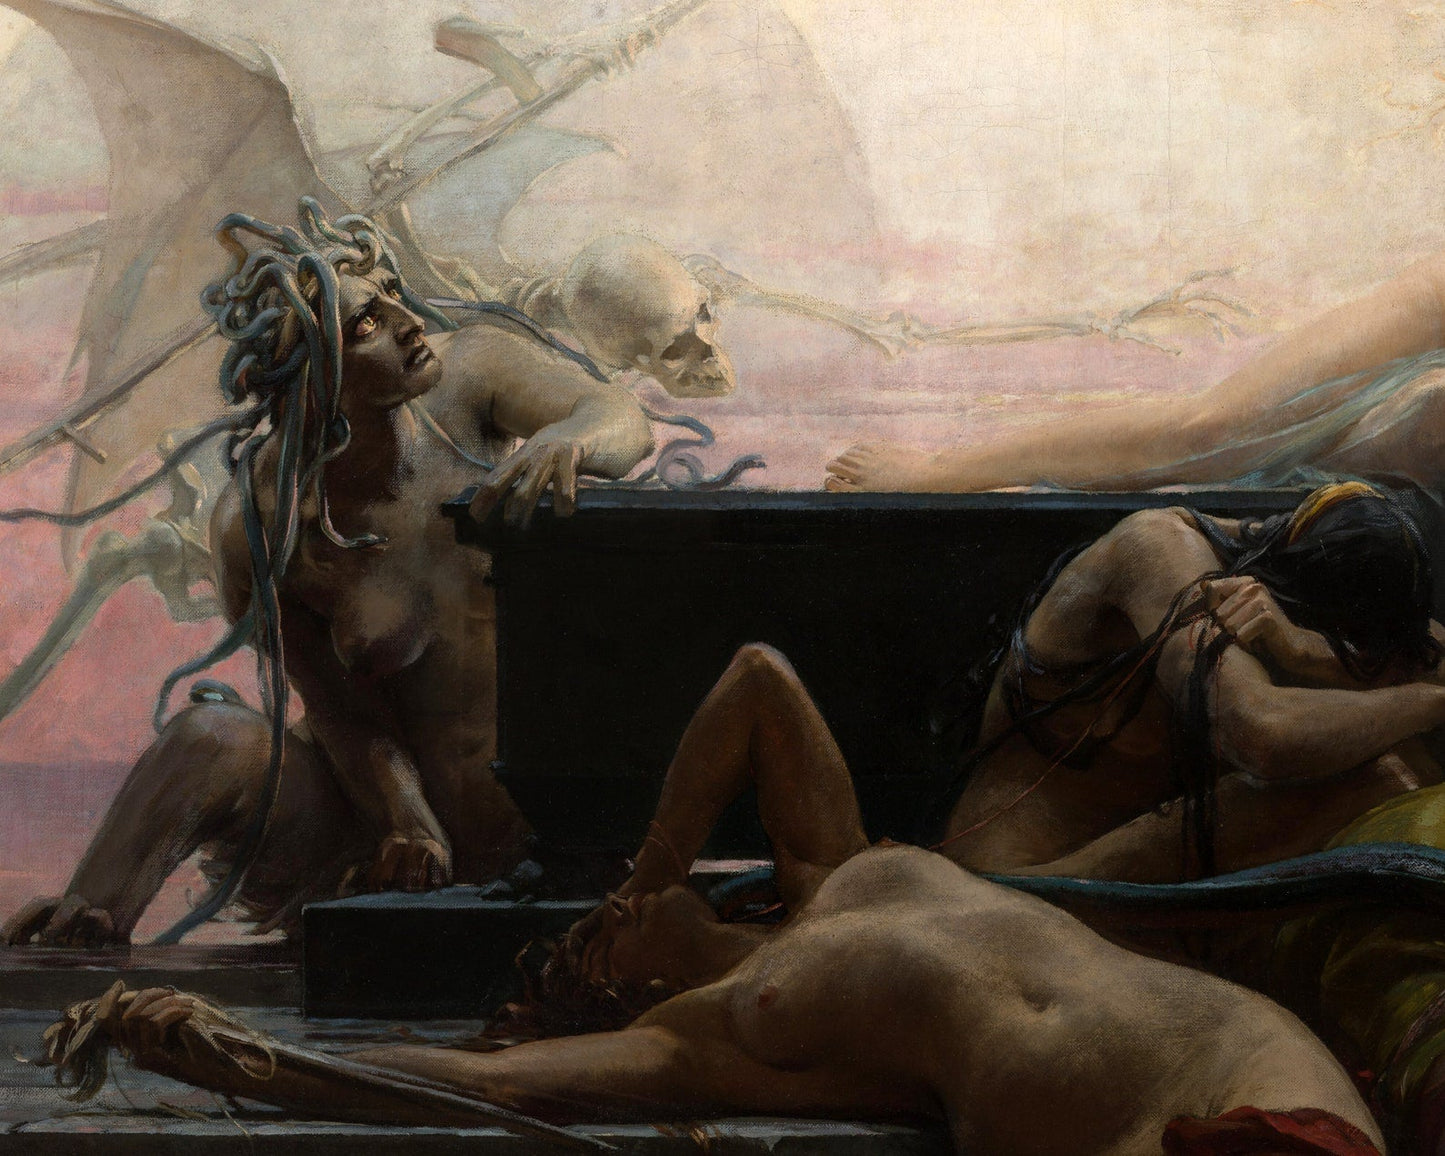 Max Pirner "The End of All Things - Finis" (c.1897) - Mabon Gallery